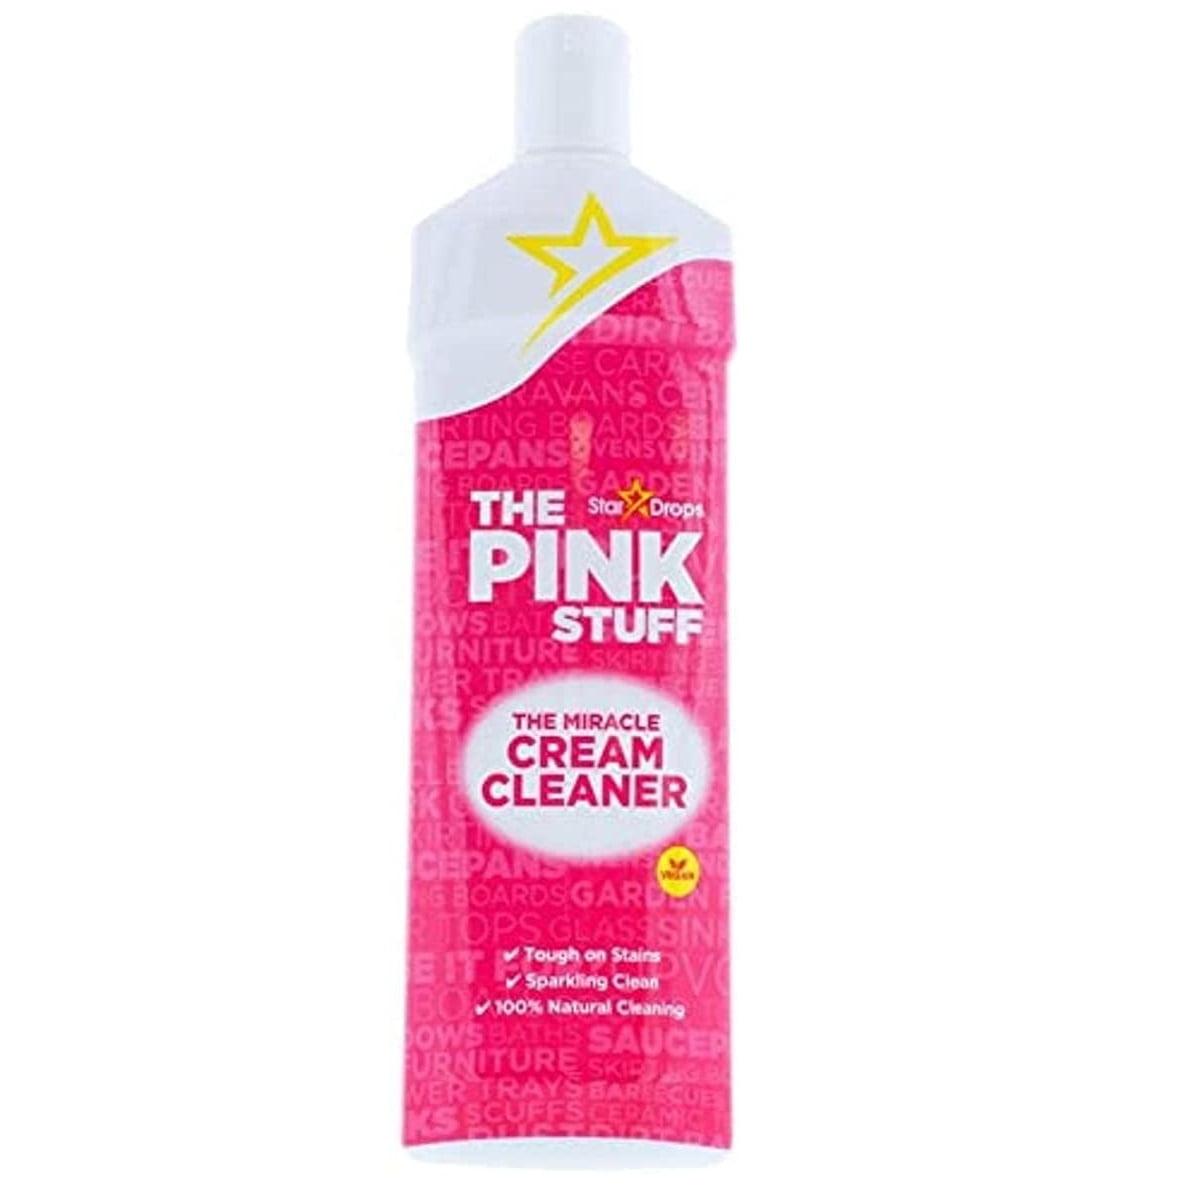 The pink stuff cream cleaner!!! Have you ever tried it?! Would you lik